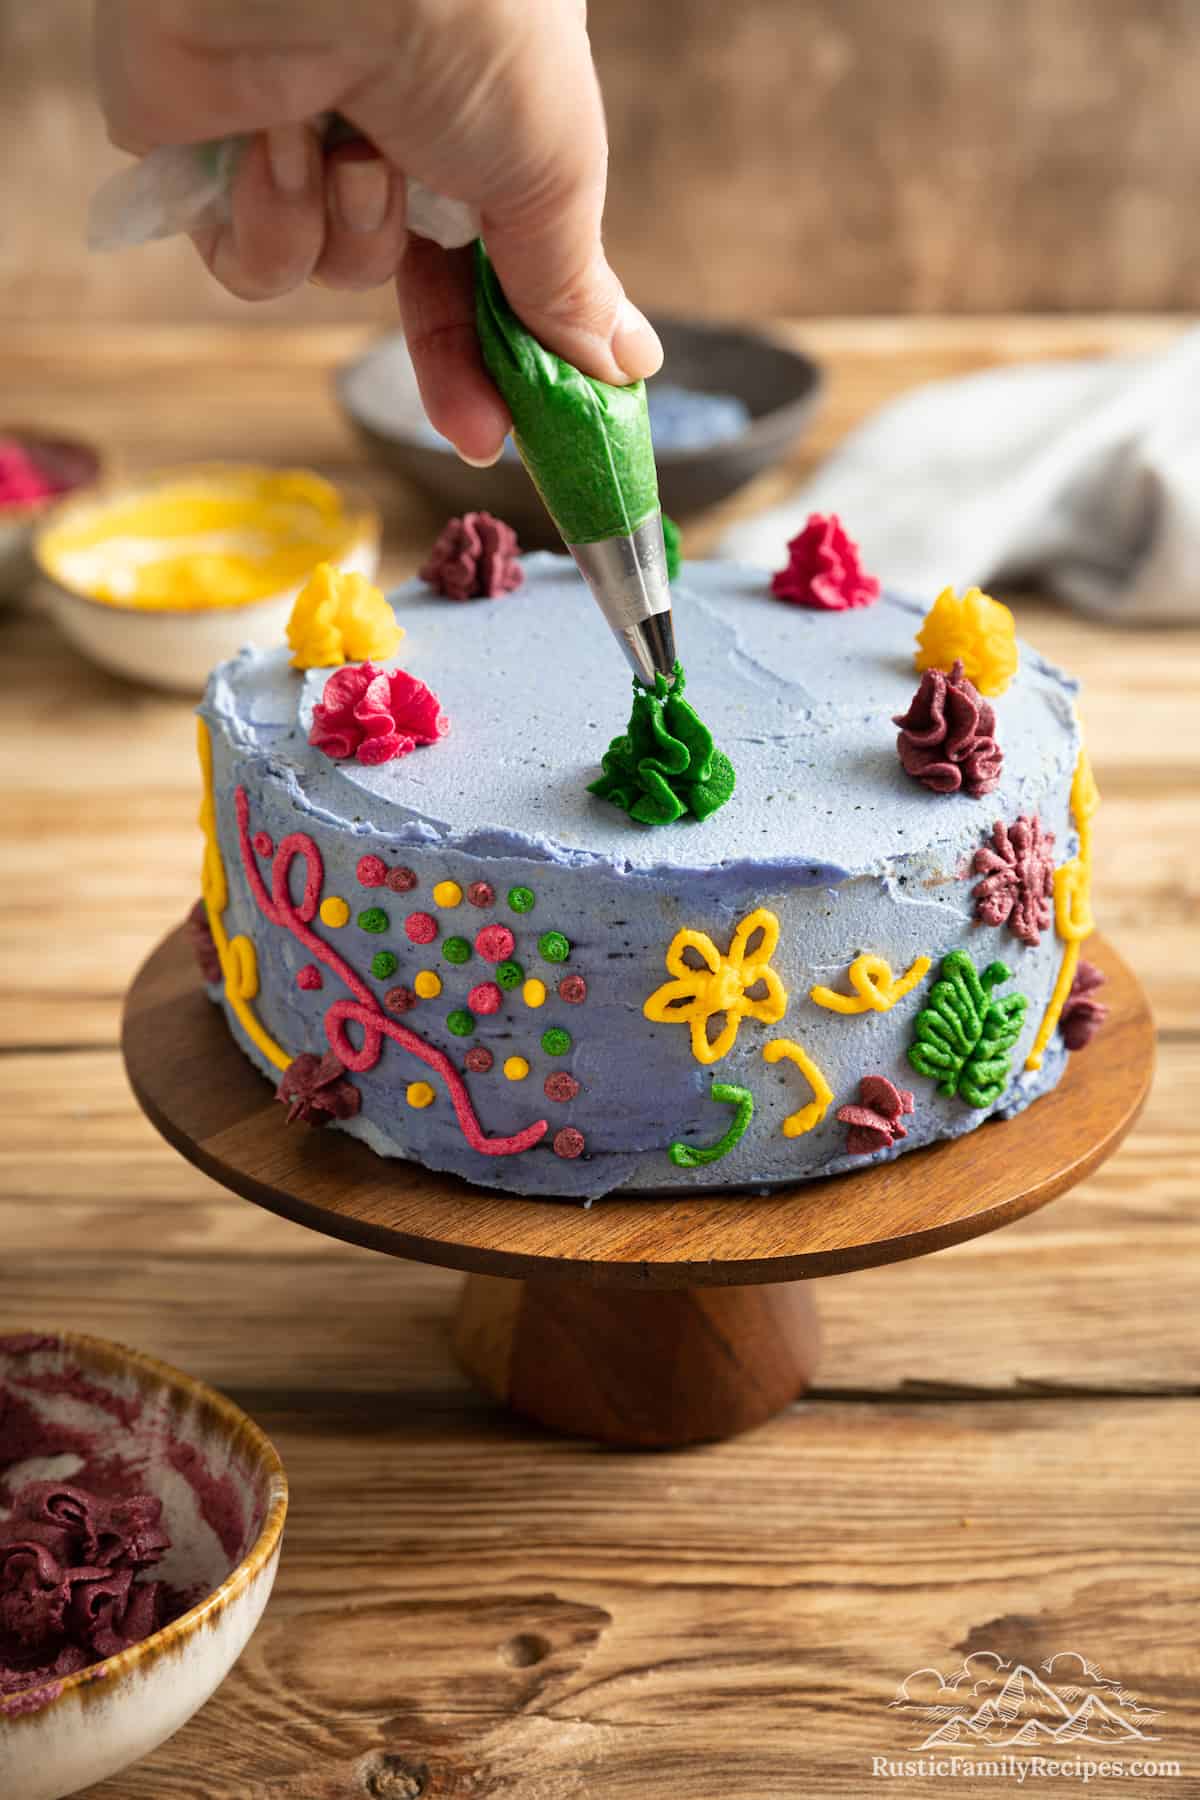 A hand pipes frosting swirls on top of a decorated Encanto cake.